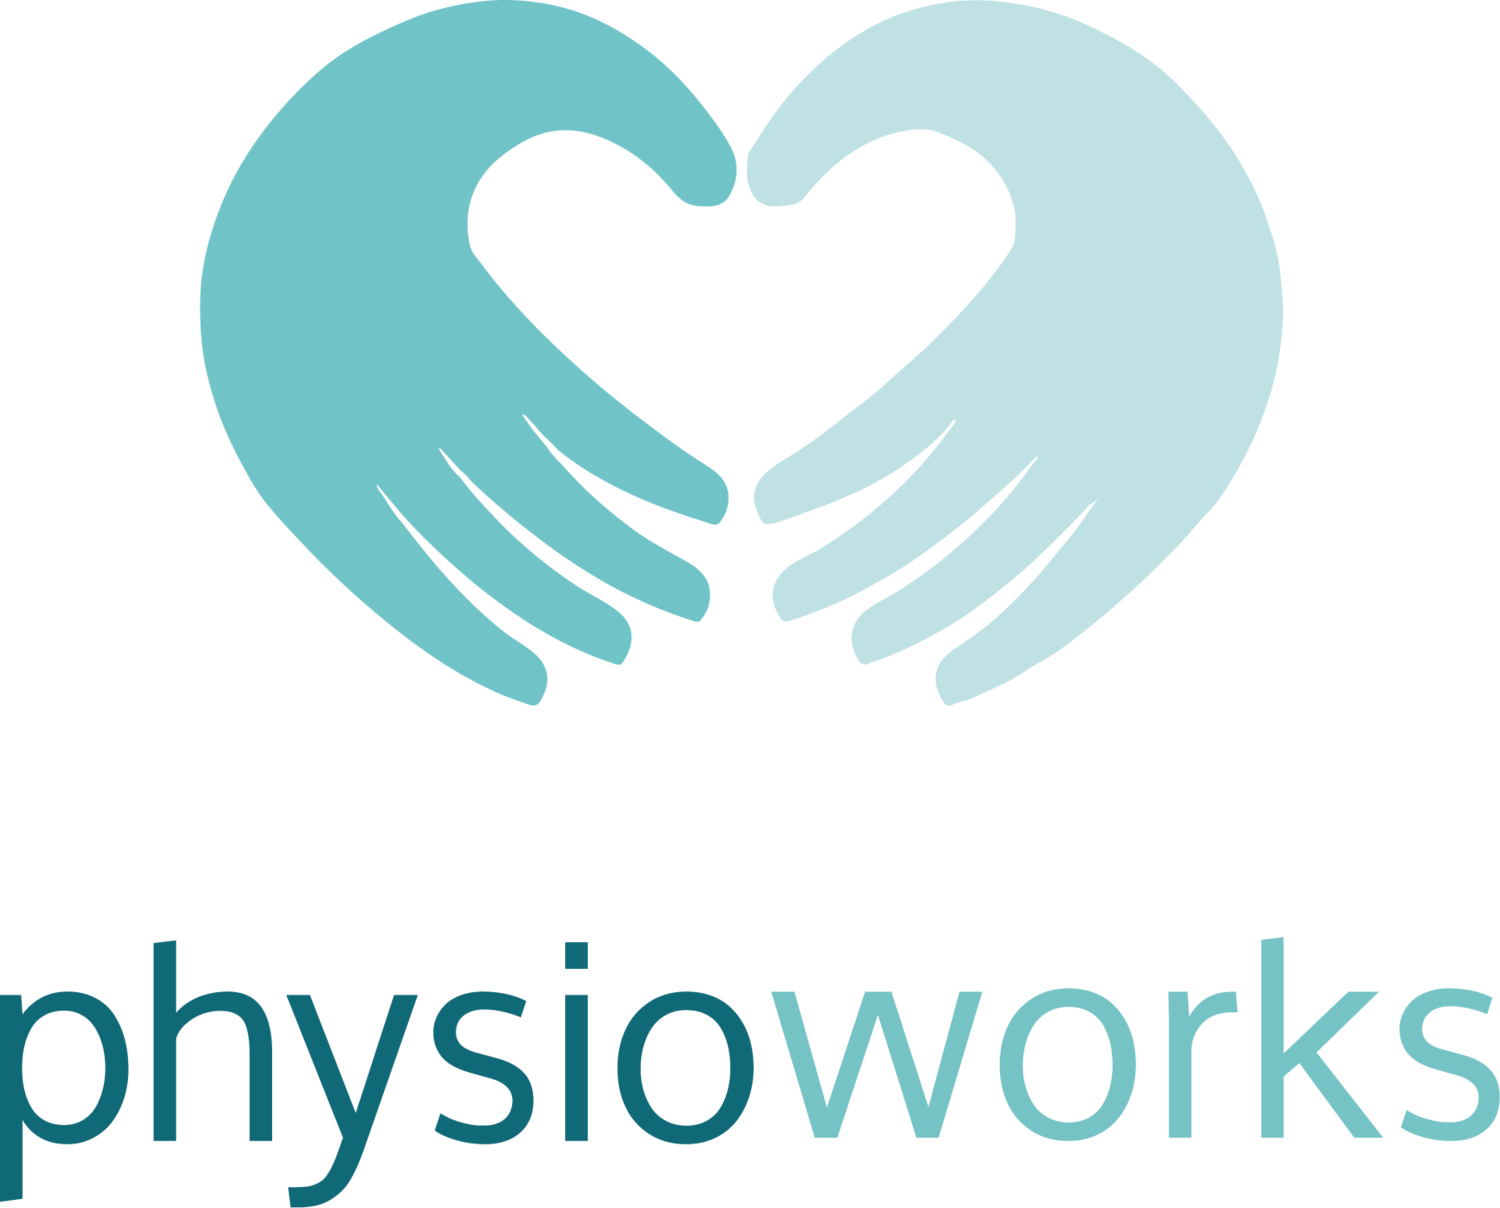 Physioworks Moycullen